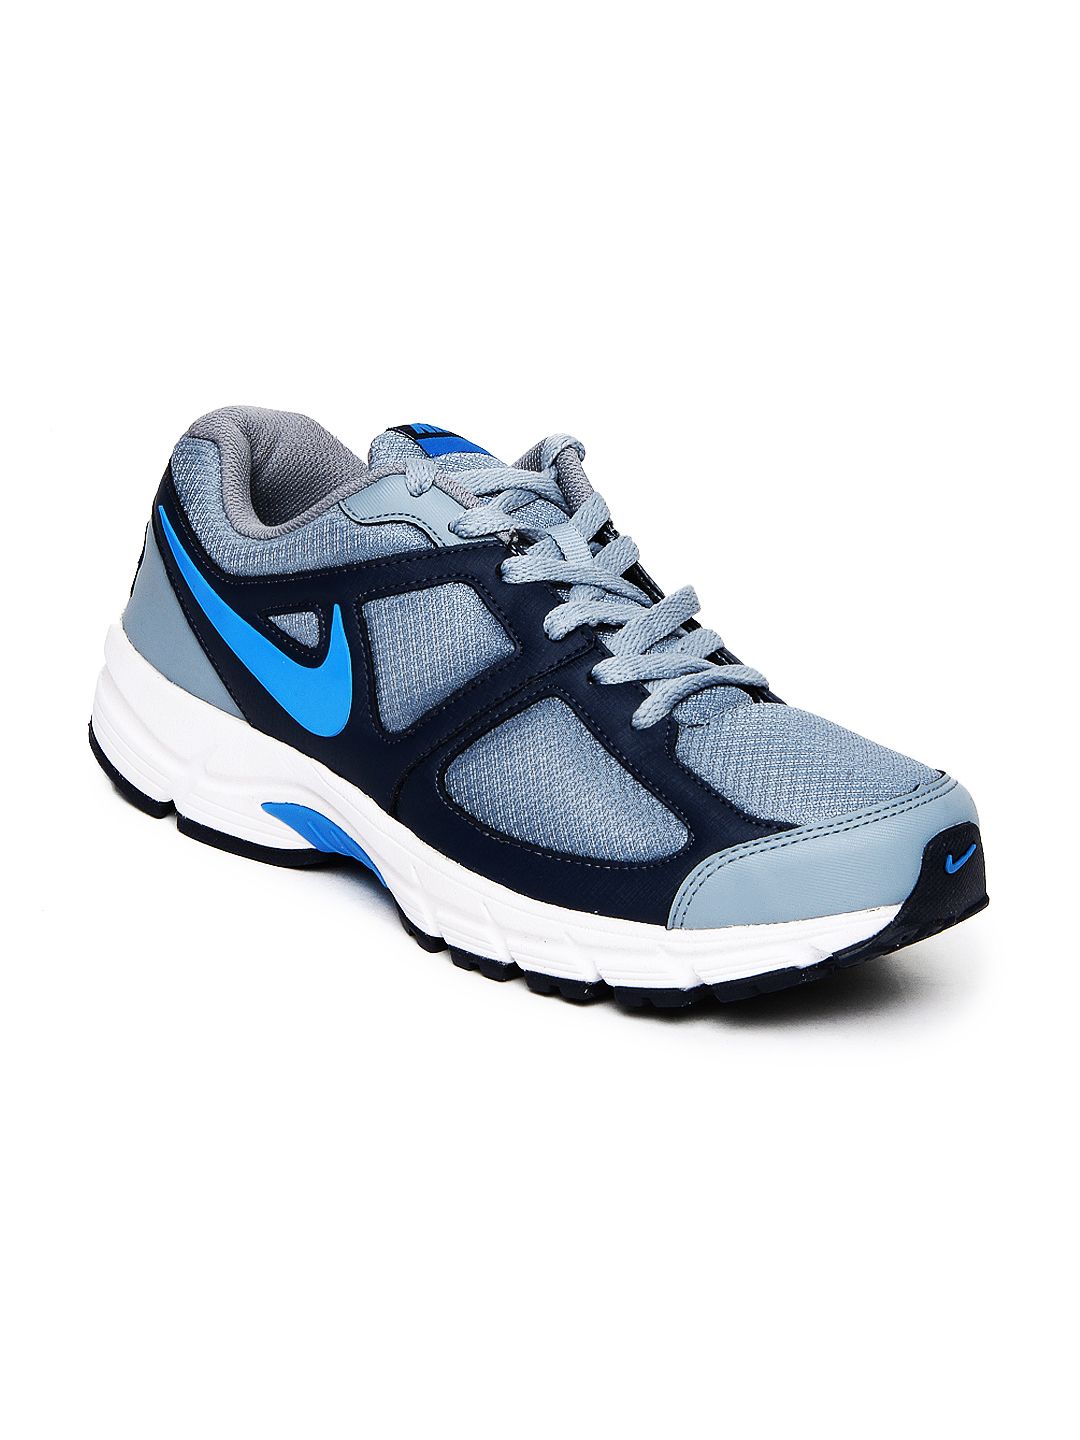 Nike Shoes: Nike Shoes Online India Price